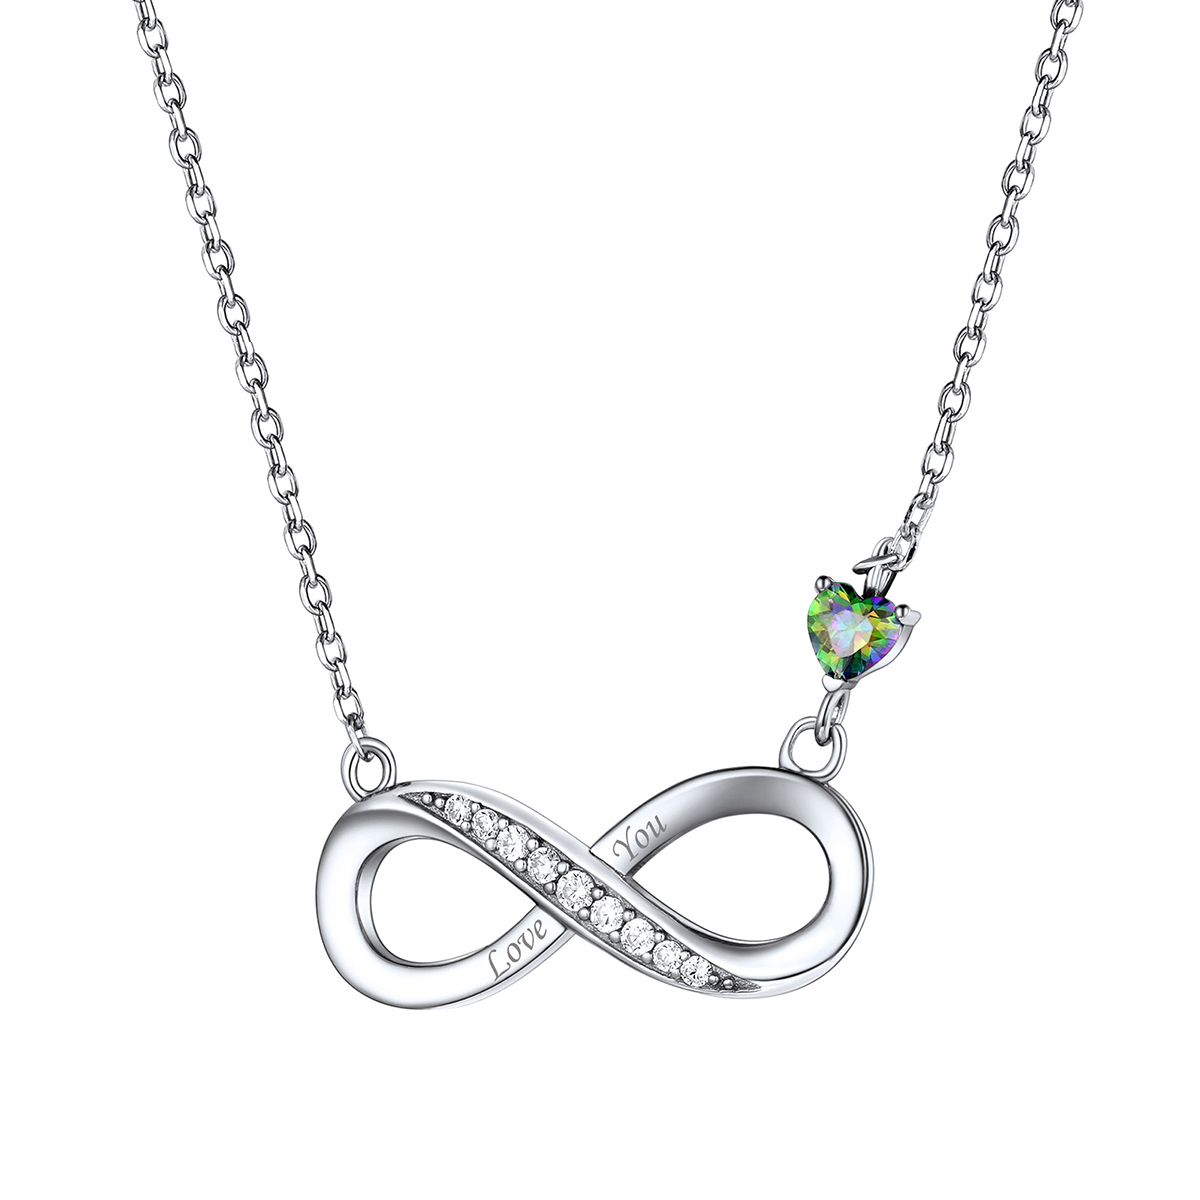 ChicSilver Sterling Silver Infinity Necklace CZ Necklace For Women 